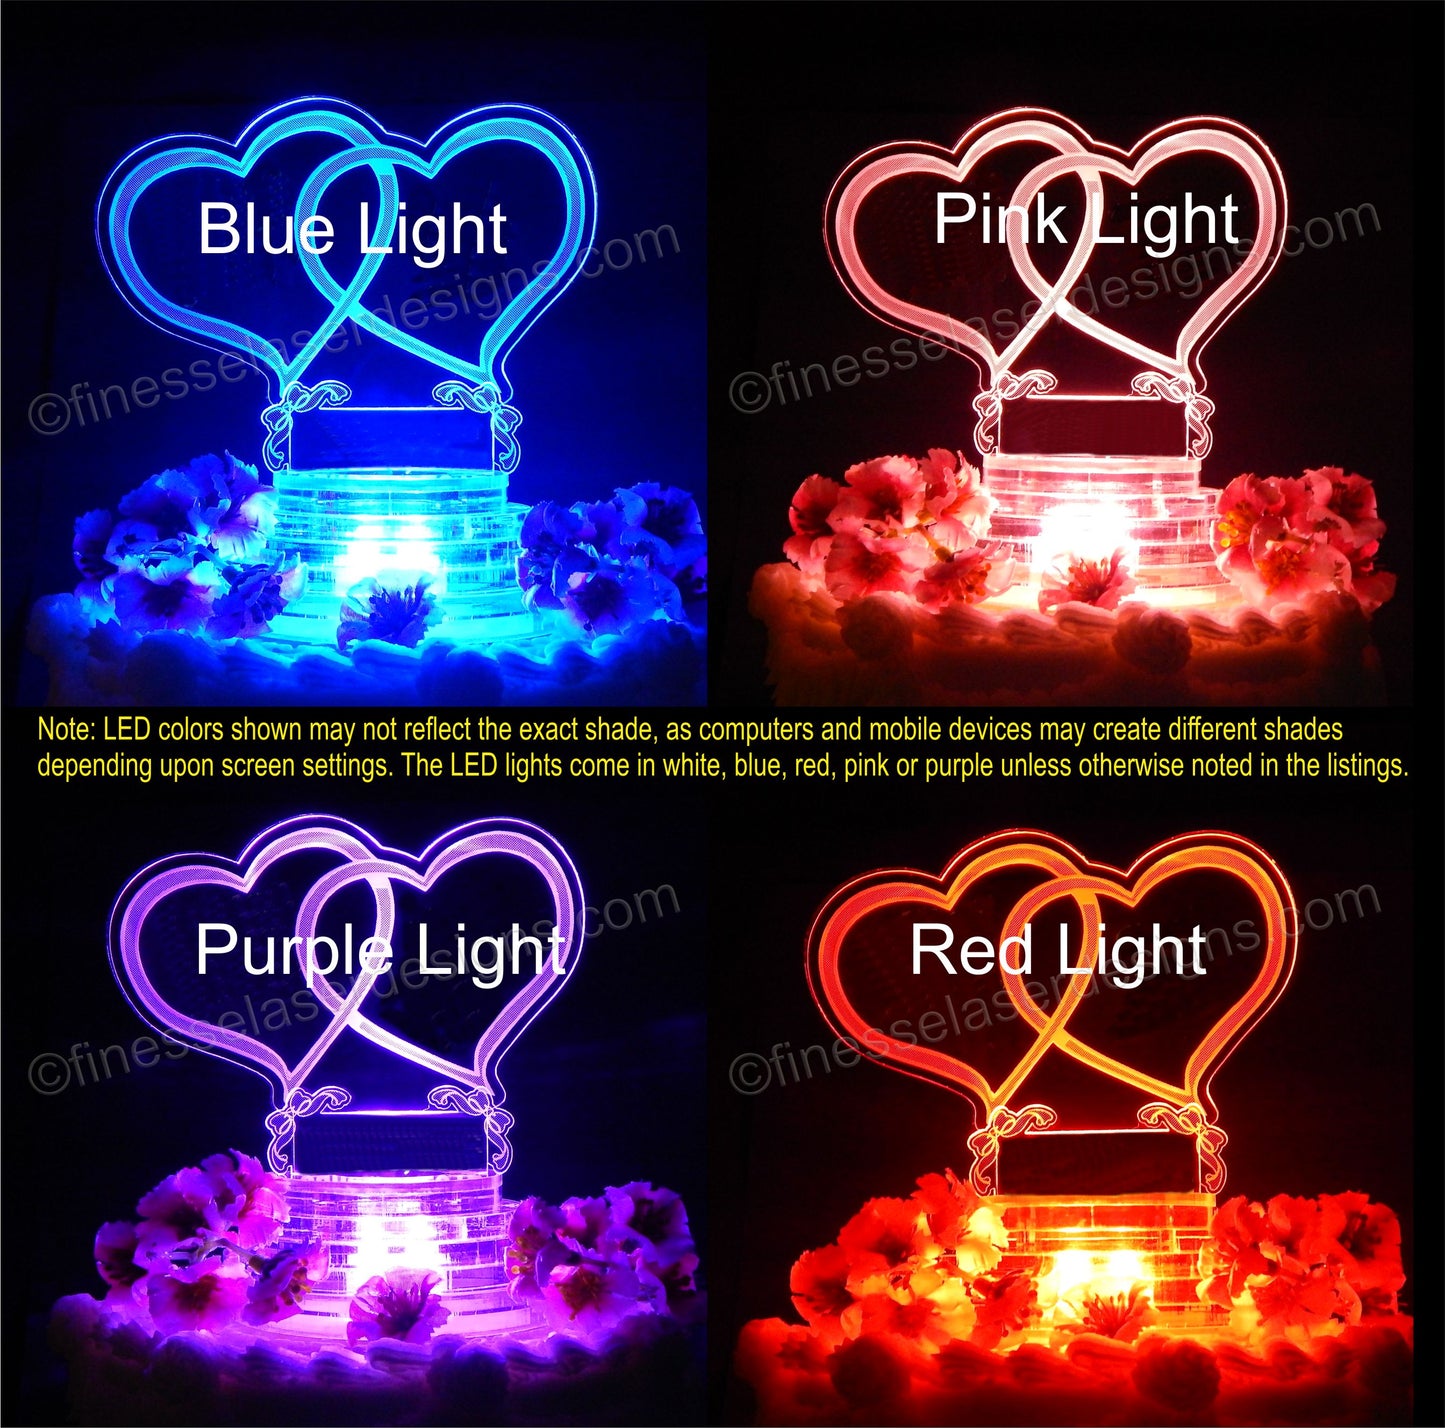 acrylic double heart designed cake topper shown with 4 lighted color views in blue, pink, purple and red